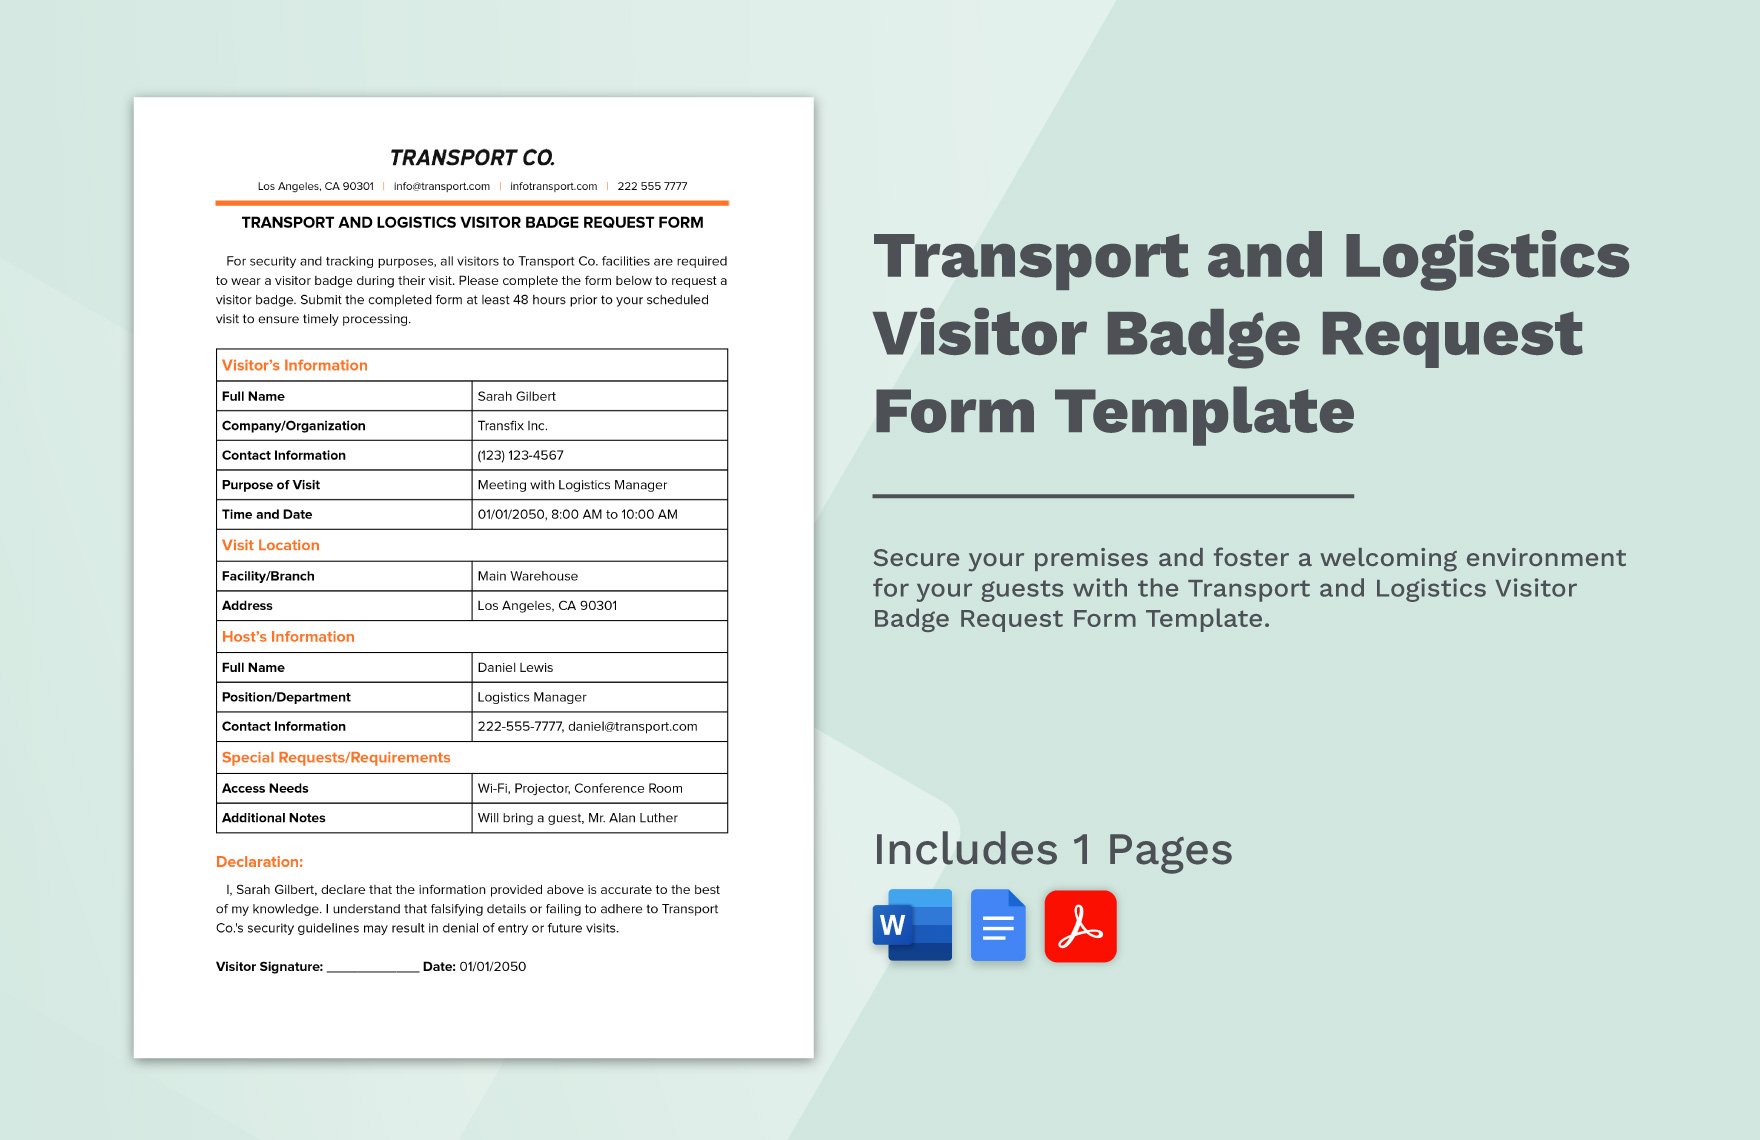 Transport and Logistics Visitor Badge Request Form Template in Word, Google Docs, PDF